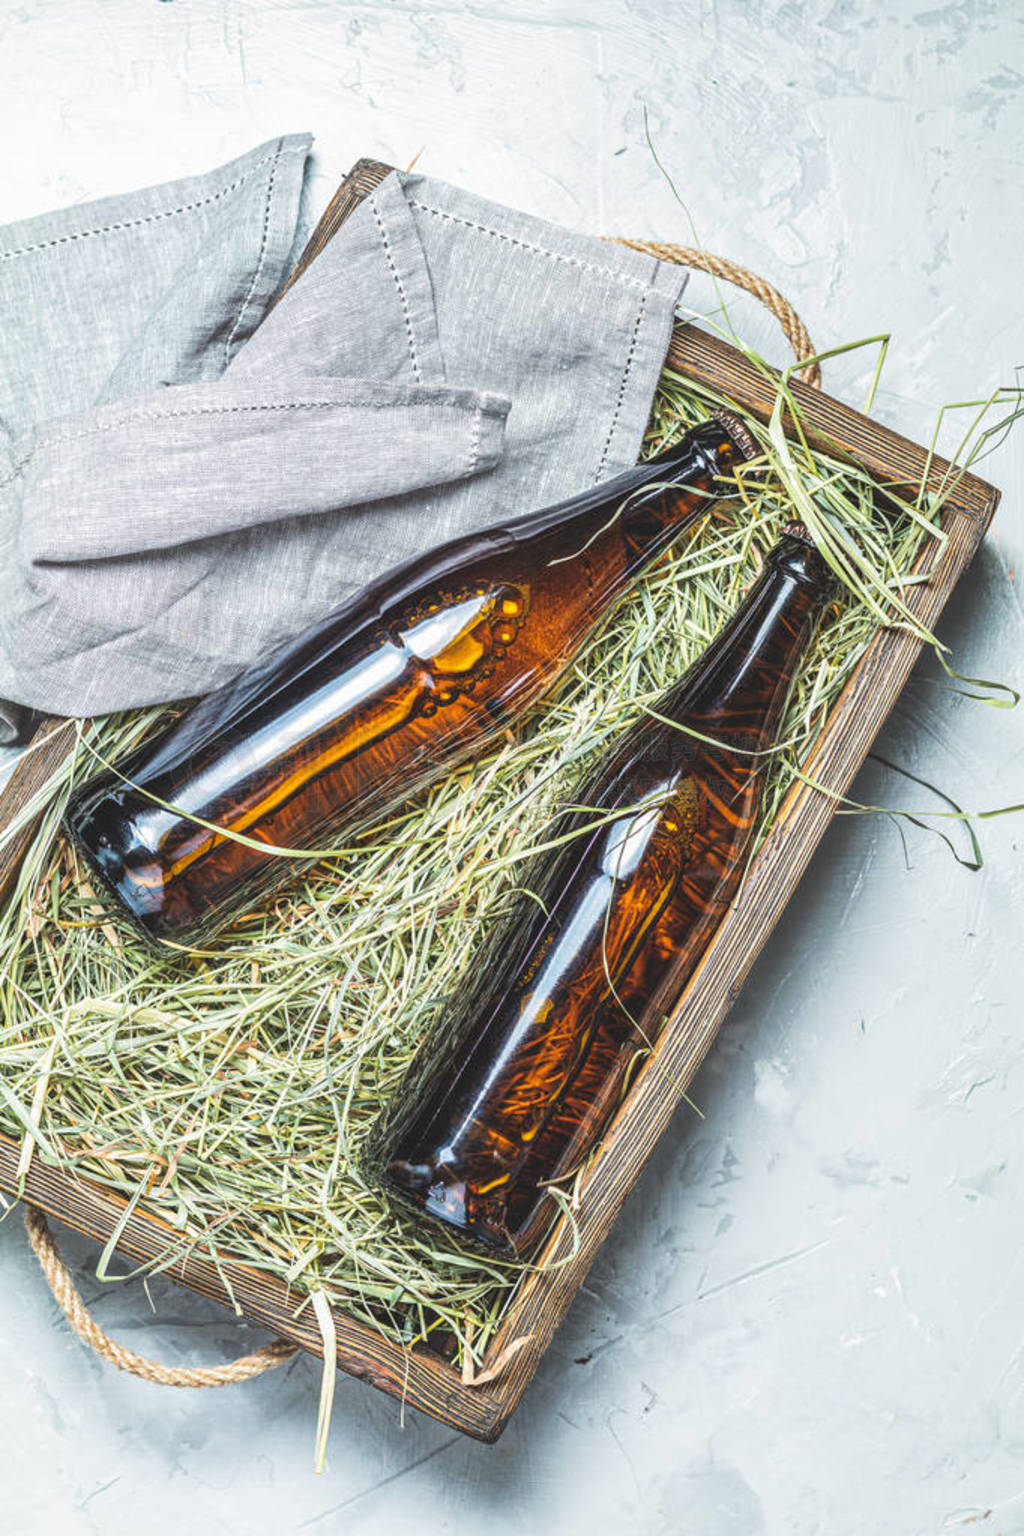 Craft beer with dried grass in wooden box